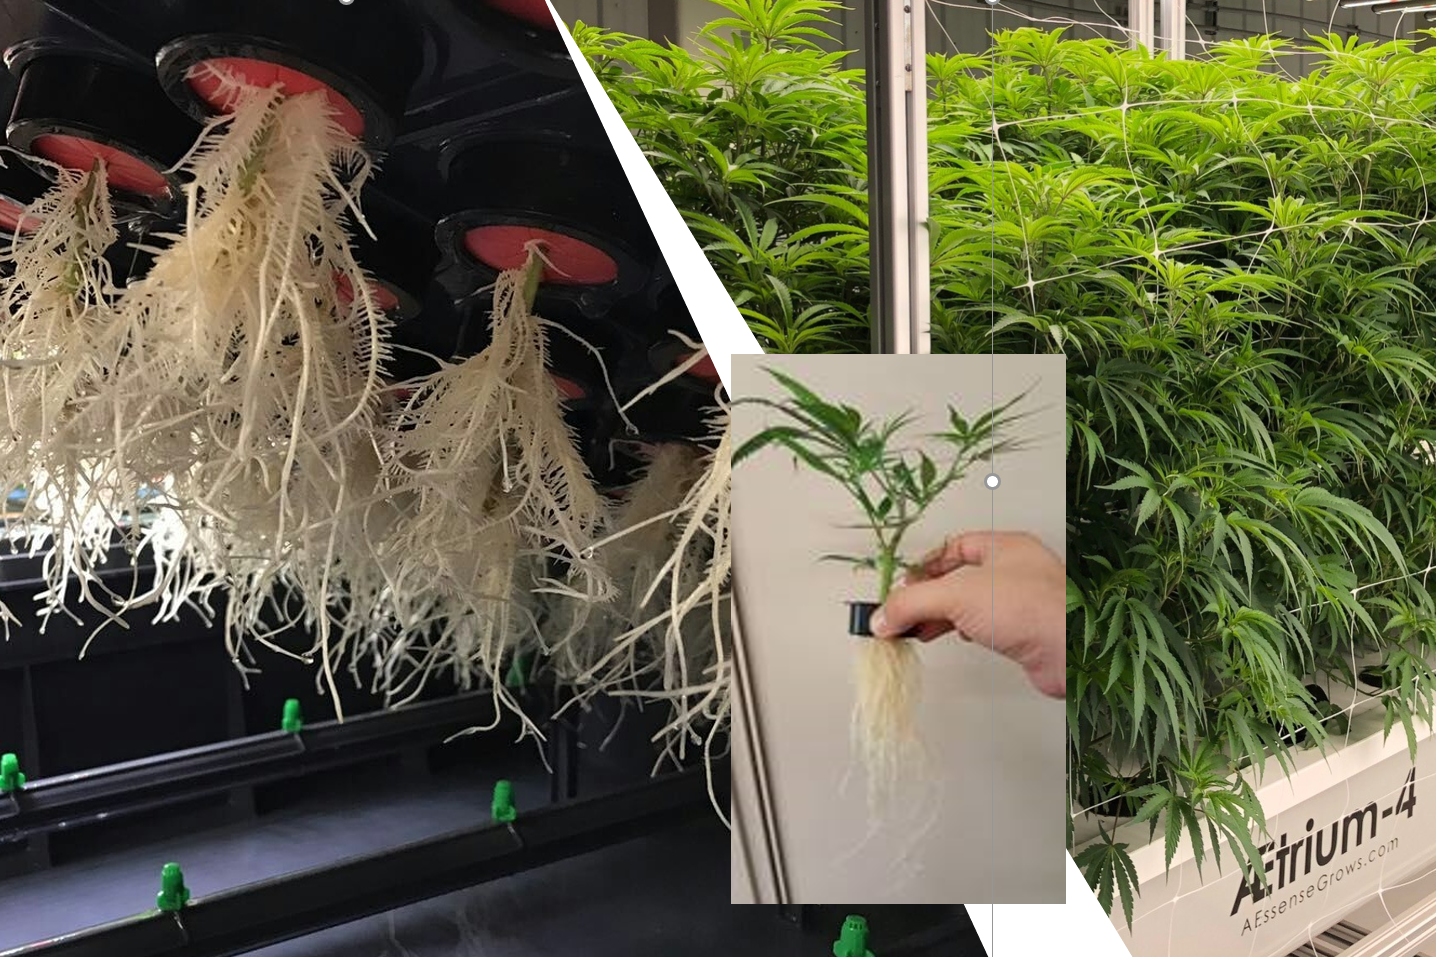 Co2 Boost Self-Activated Bag for Plants, Grow Rooms 2.0